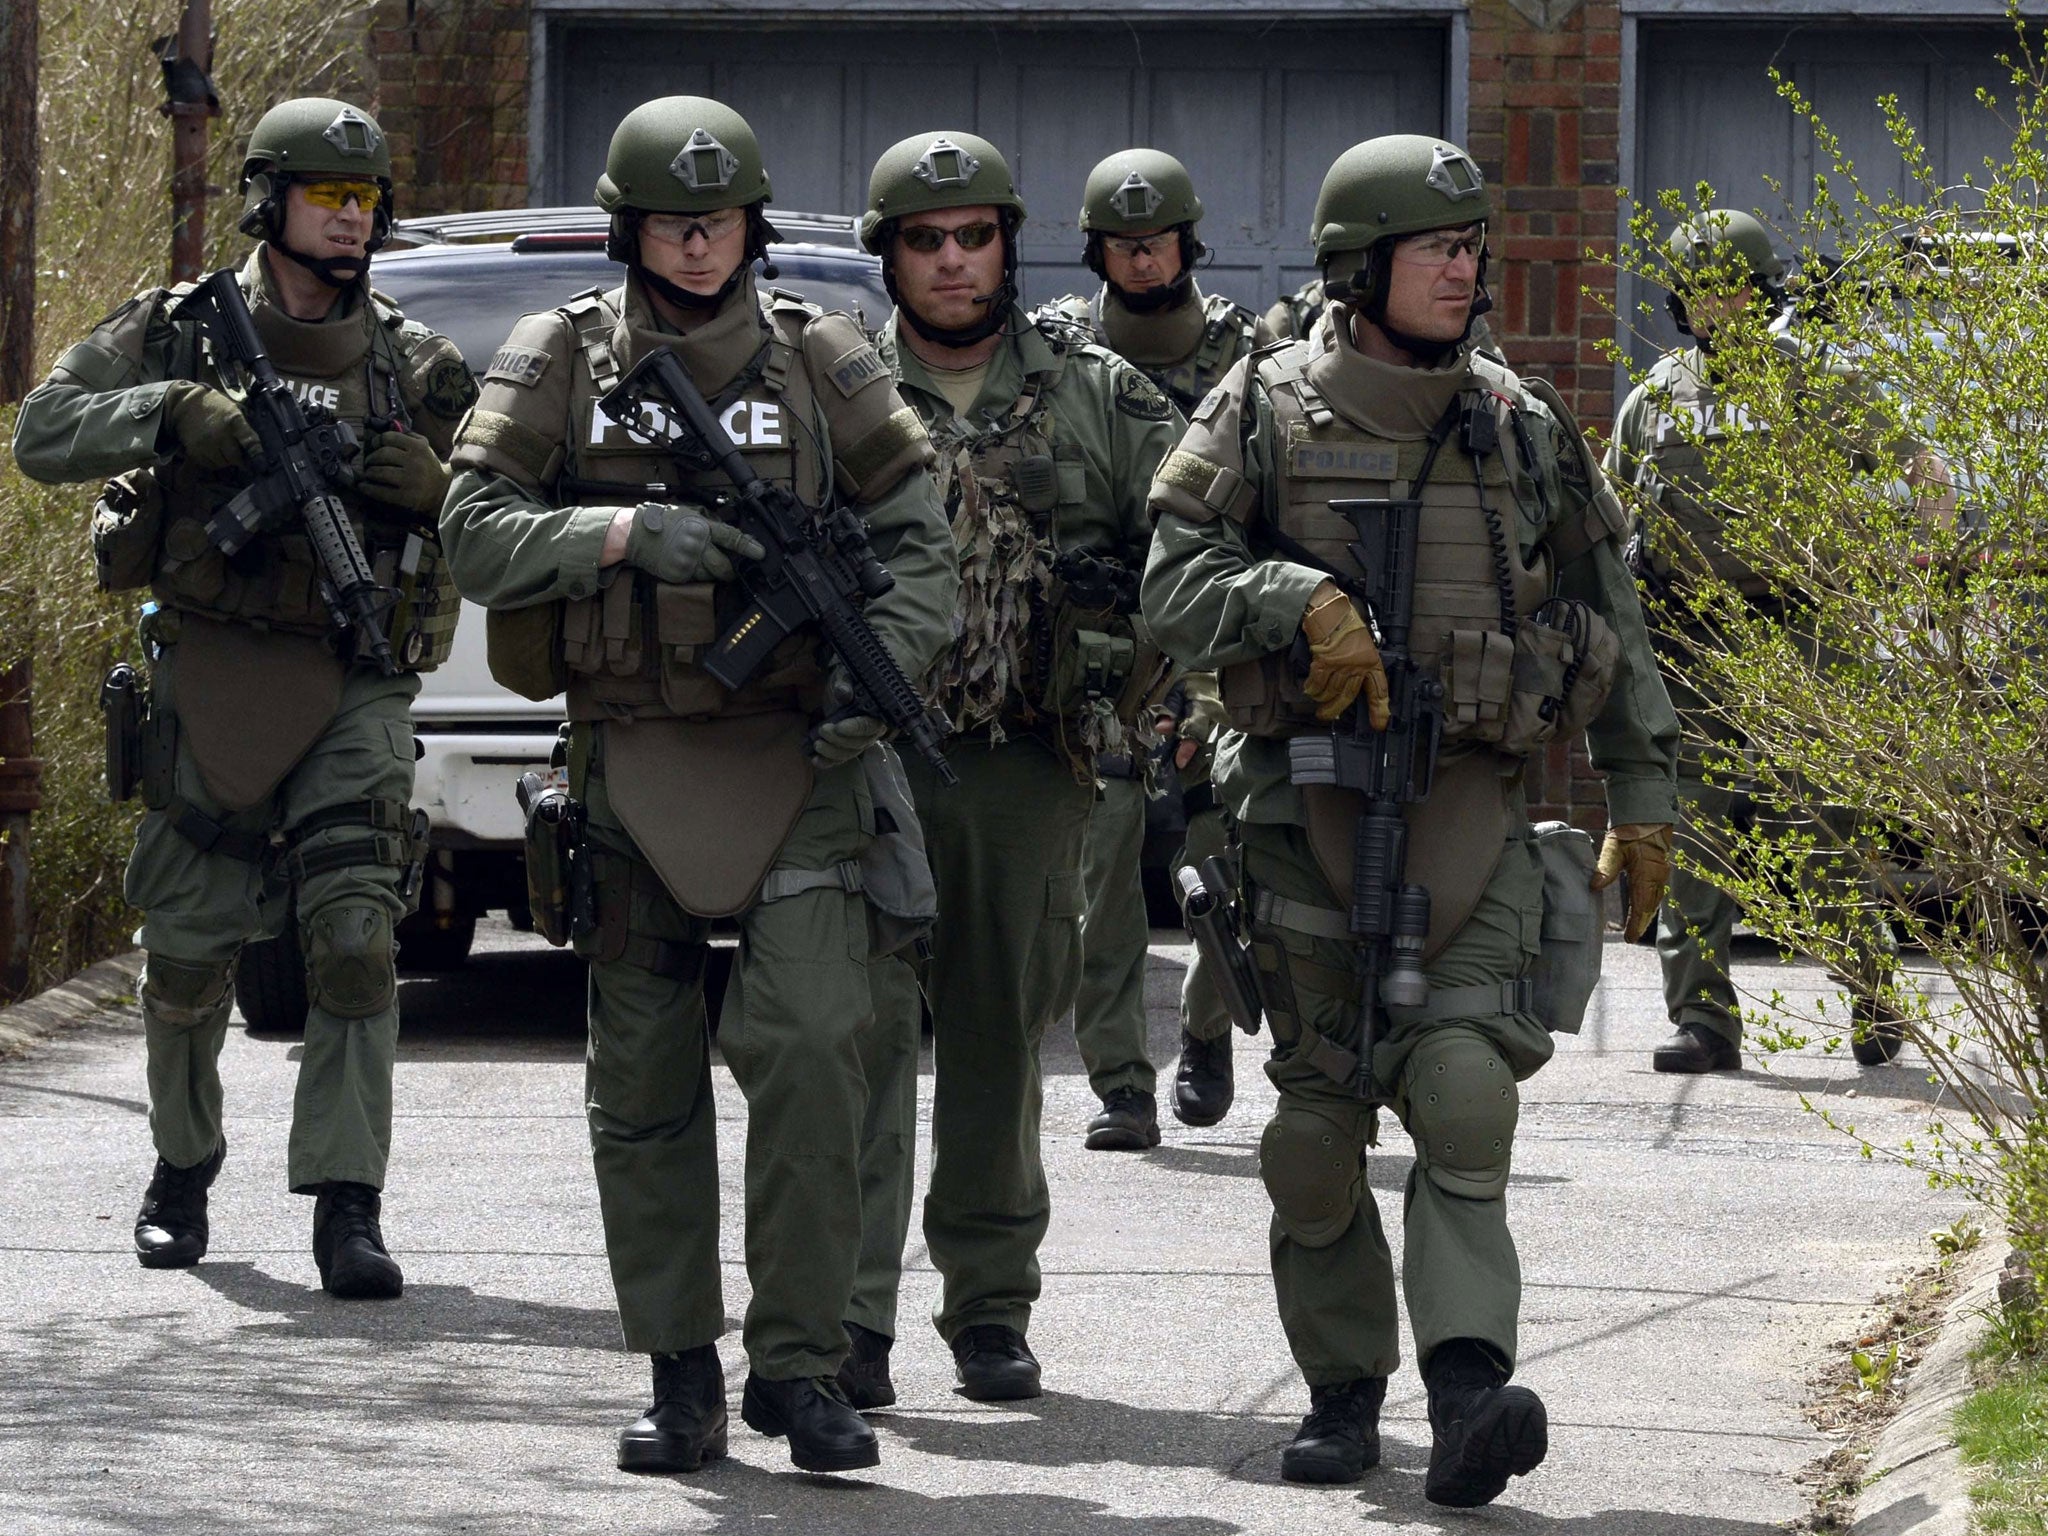 Home watch: A police Swat team searching Watertown, Boston, on Friday